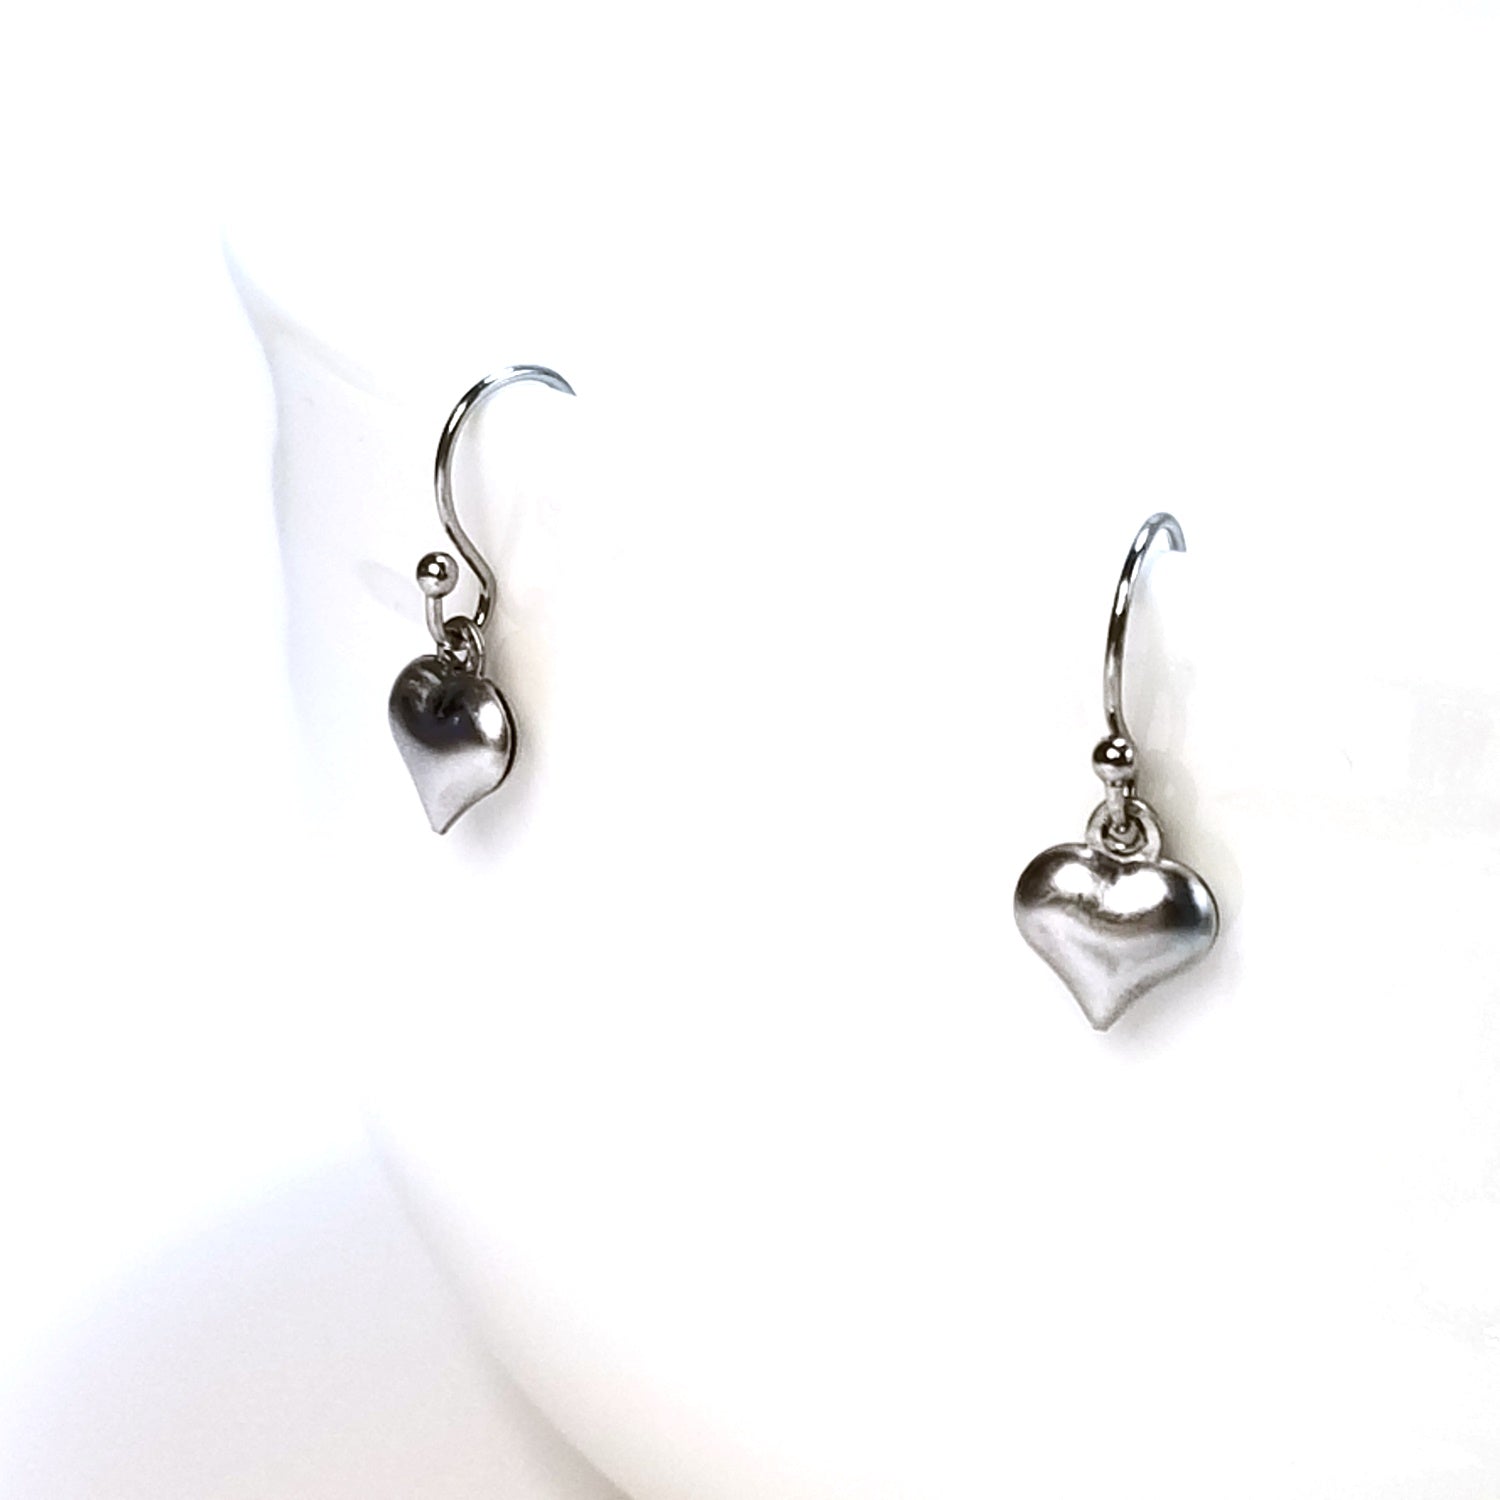 How to Change Earring Hooks to Sterling Silver